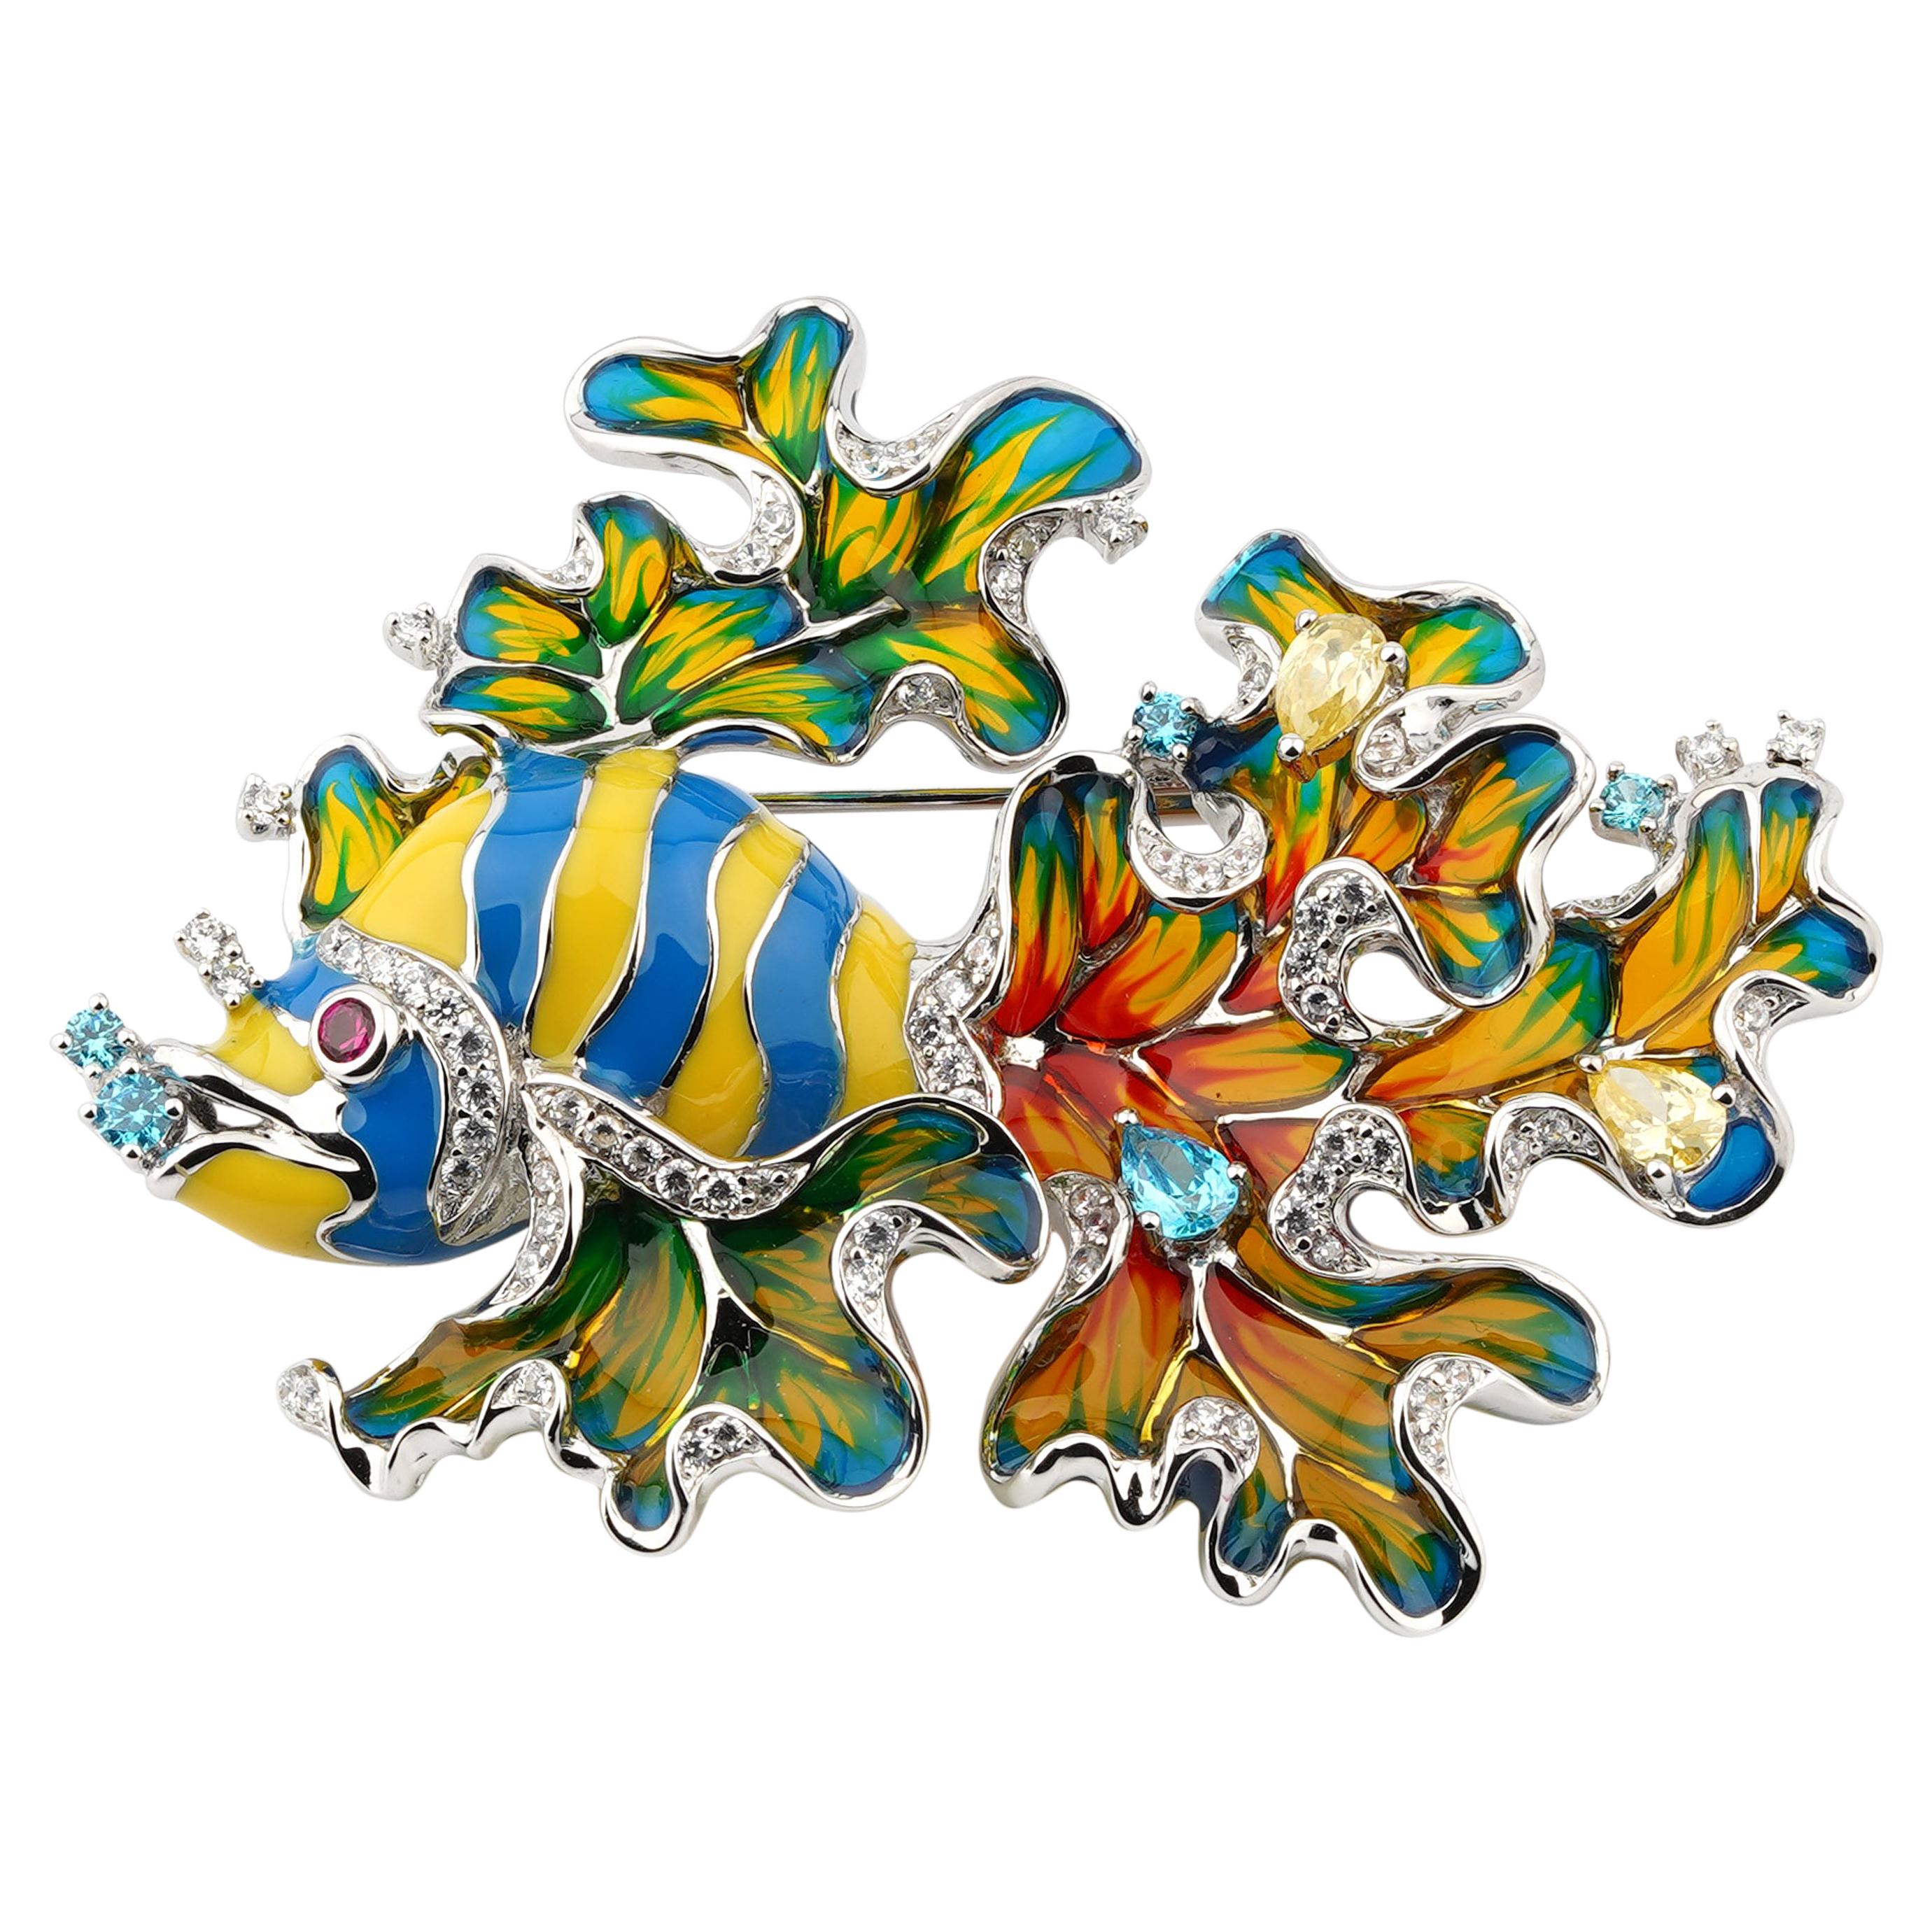 Rhodium Plated 925 Sterling Silver with Enamels Clownfish Shaped Brooch